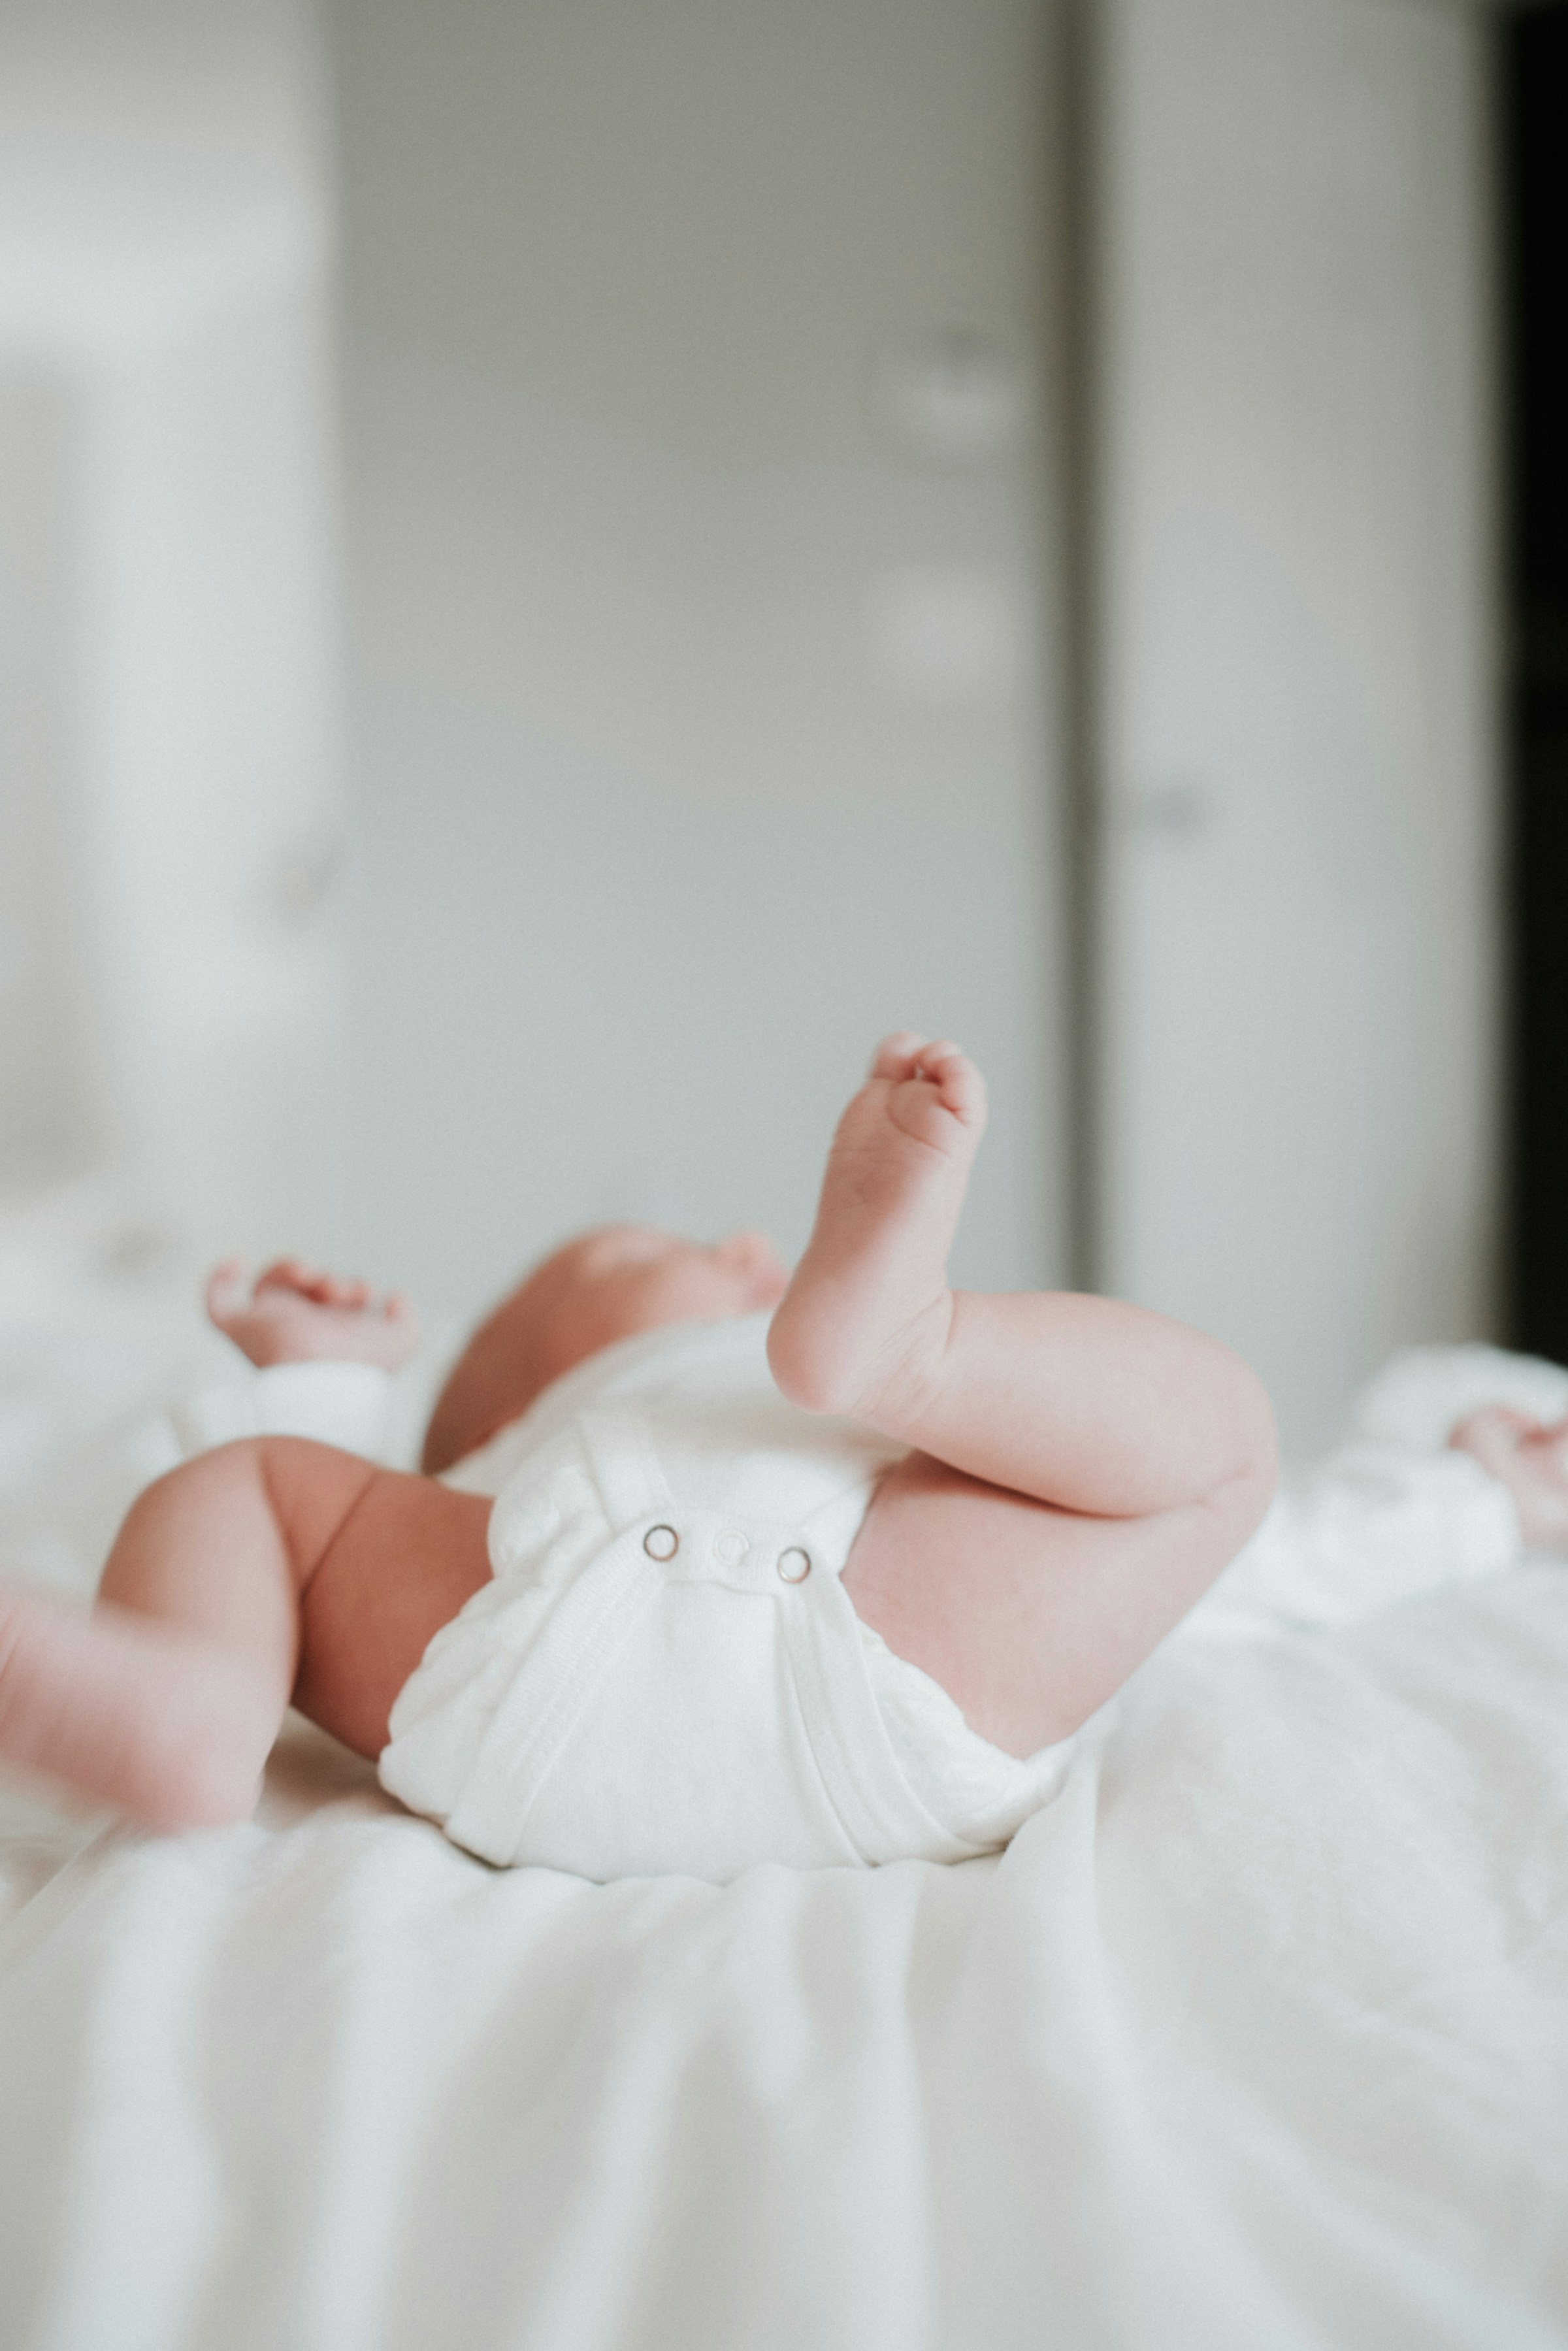 A baby on a bed | Source: Unsplash